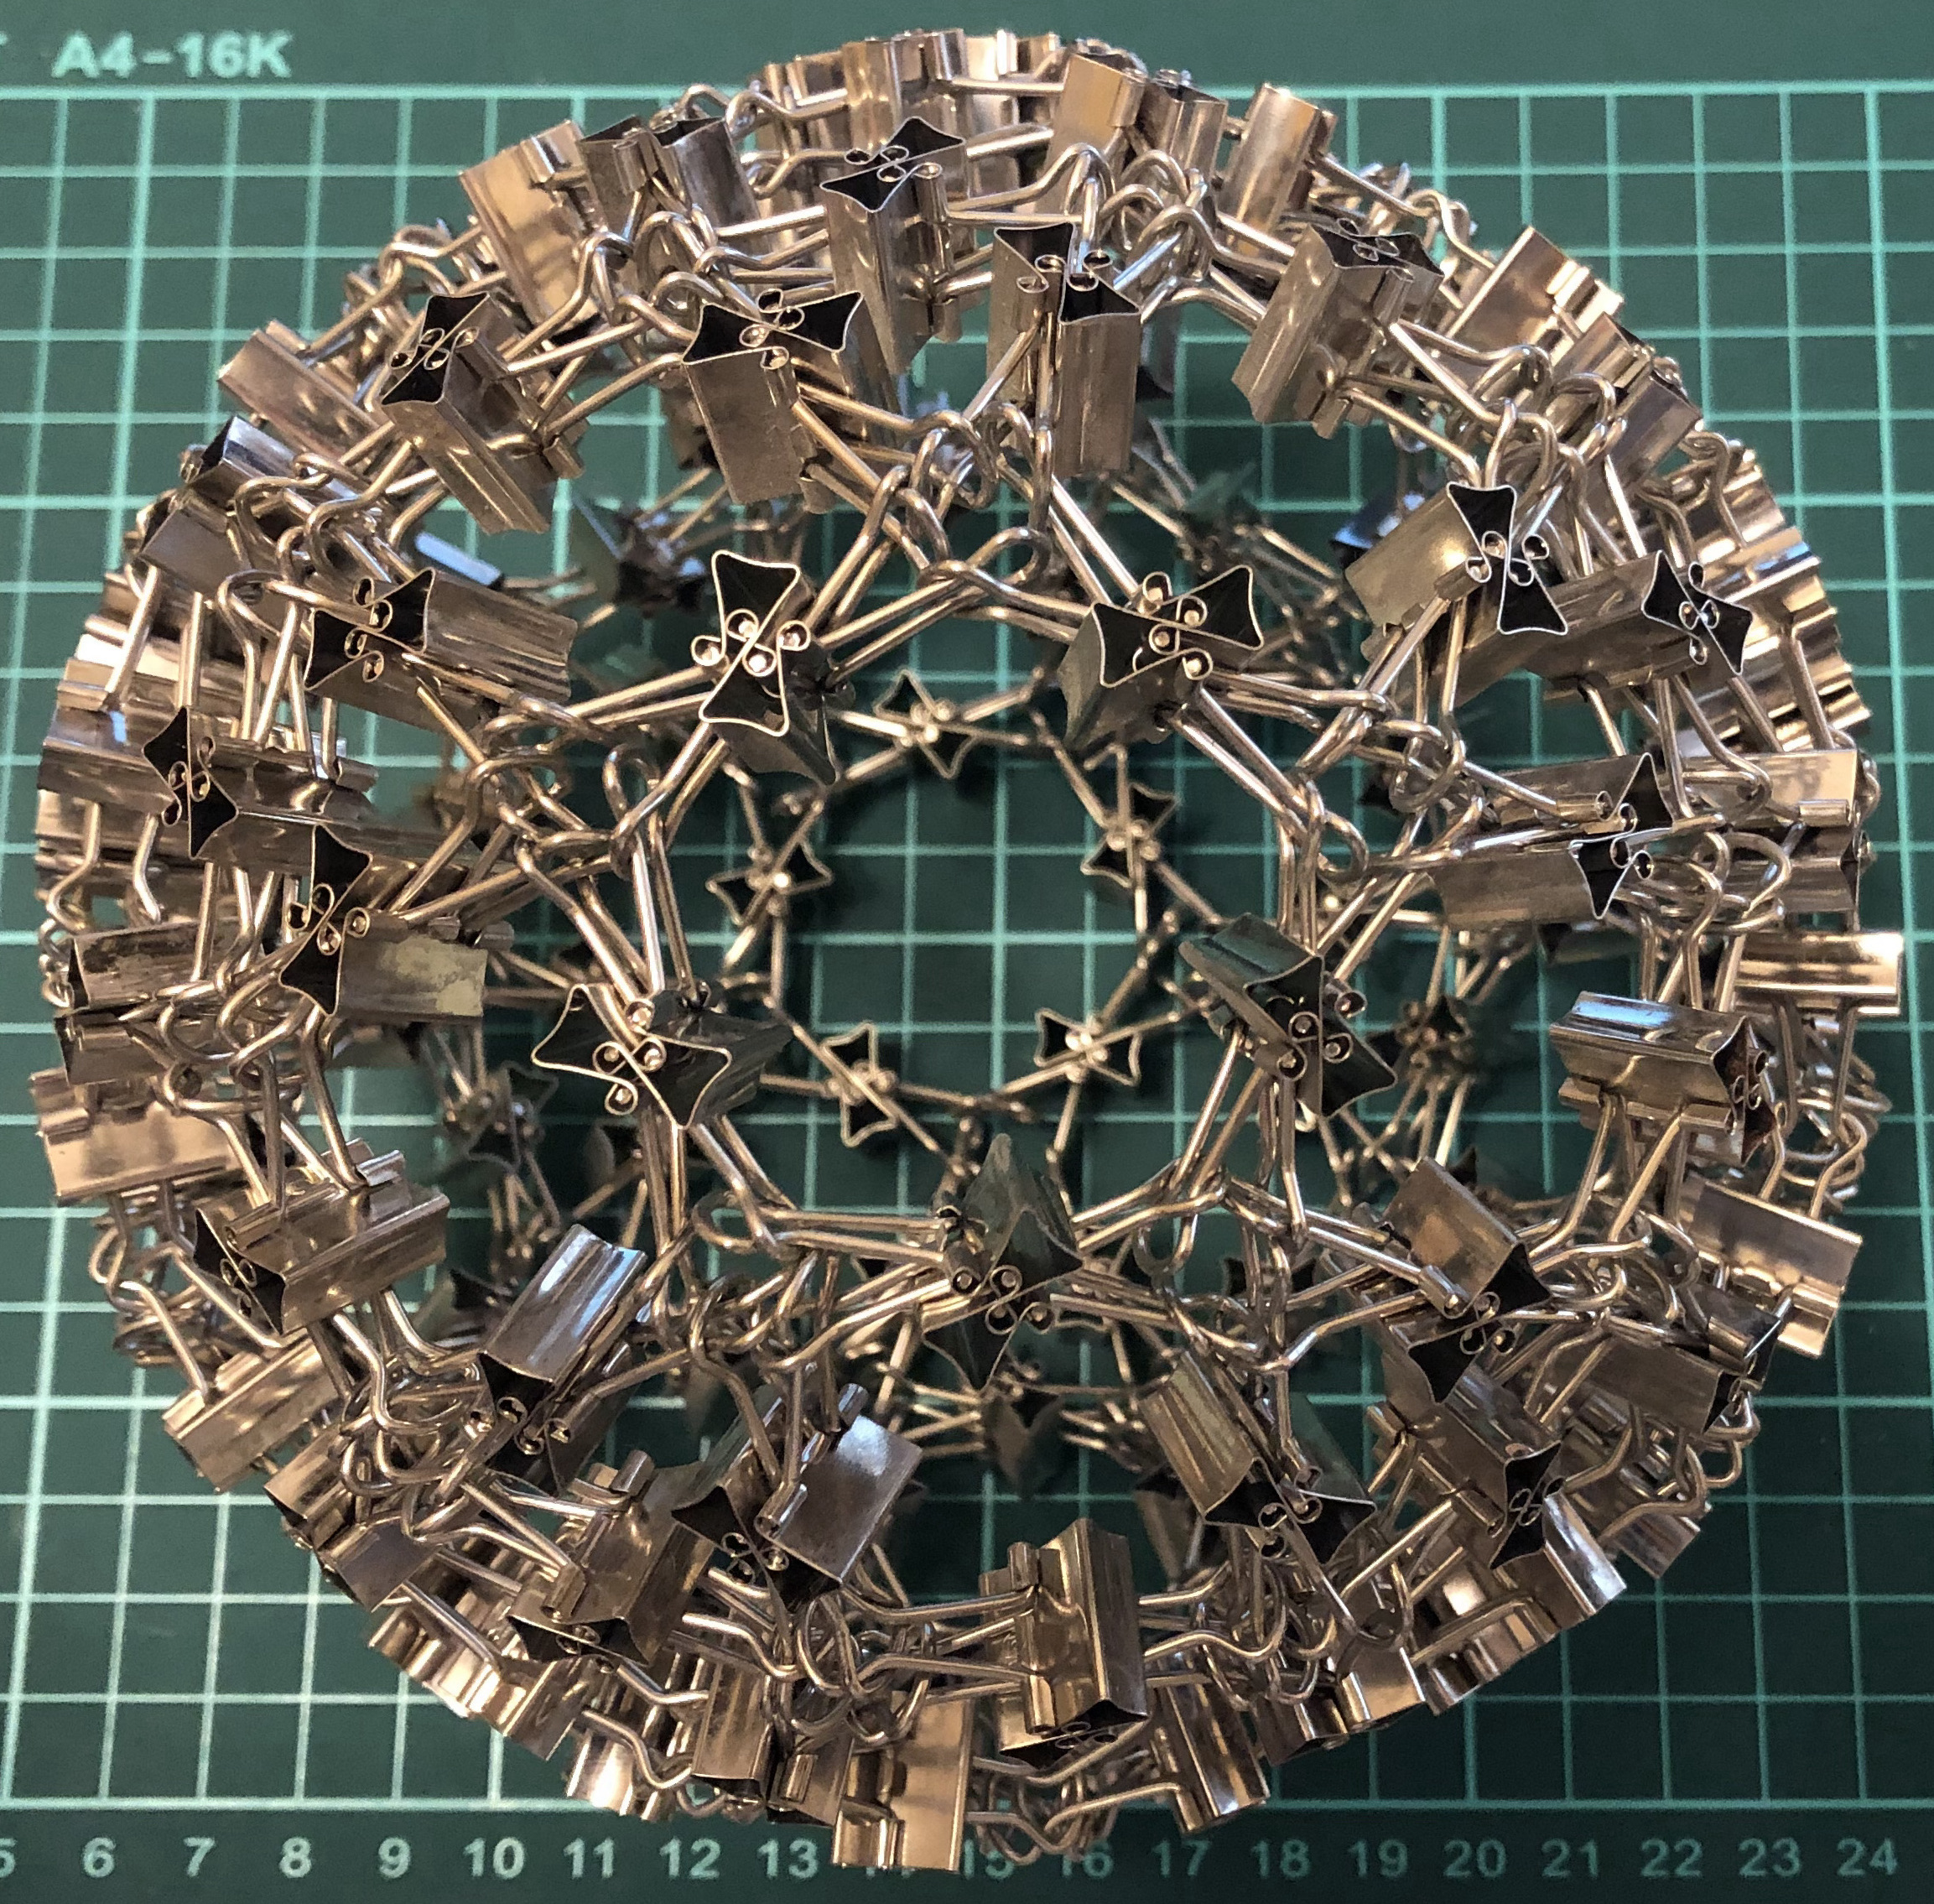 240 clips forming 120 I-edges forming rhombicosidodecahedron